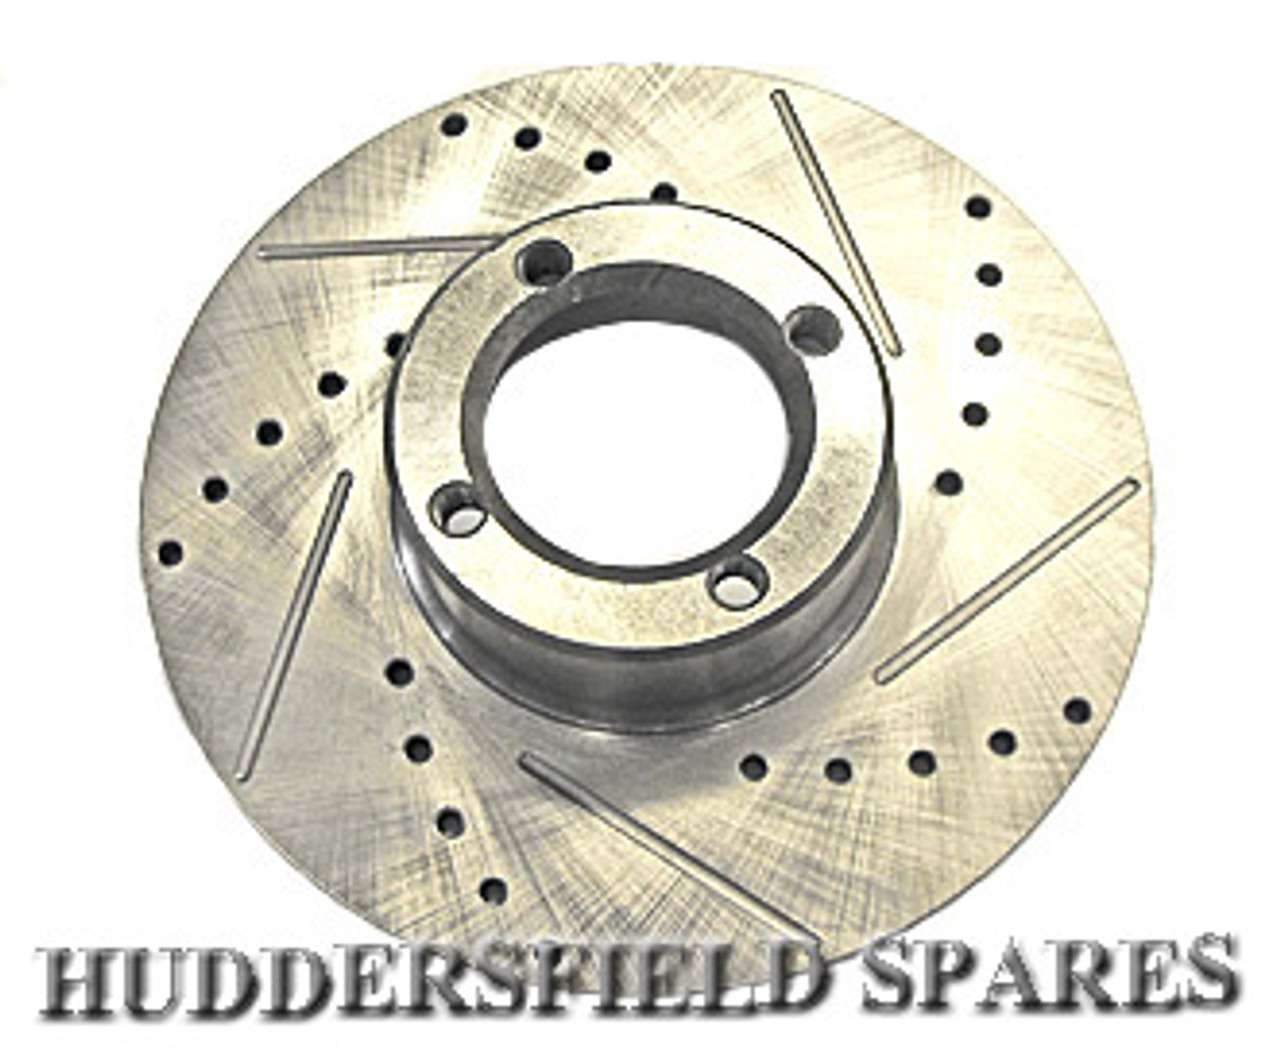 8.4" drilled and grooved discs pair